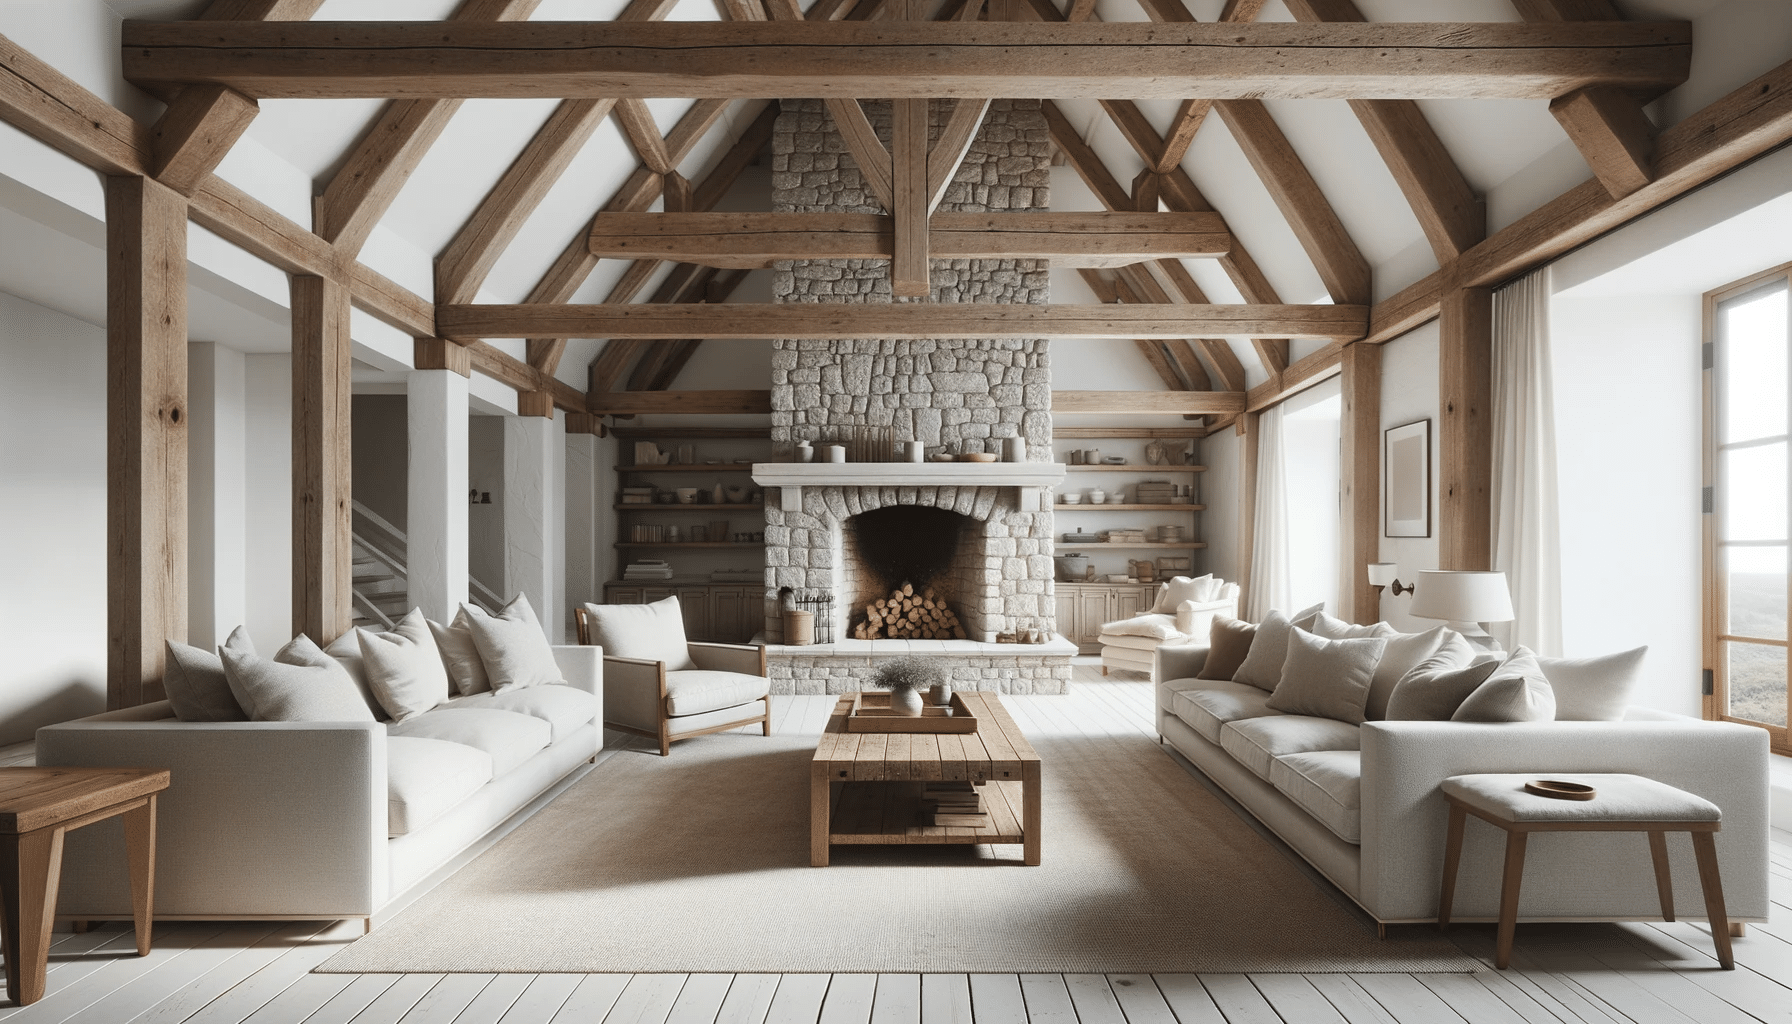 Spacious living room with exposed beams and a fireplace